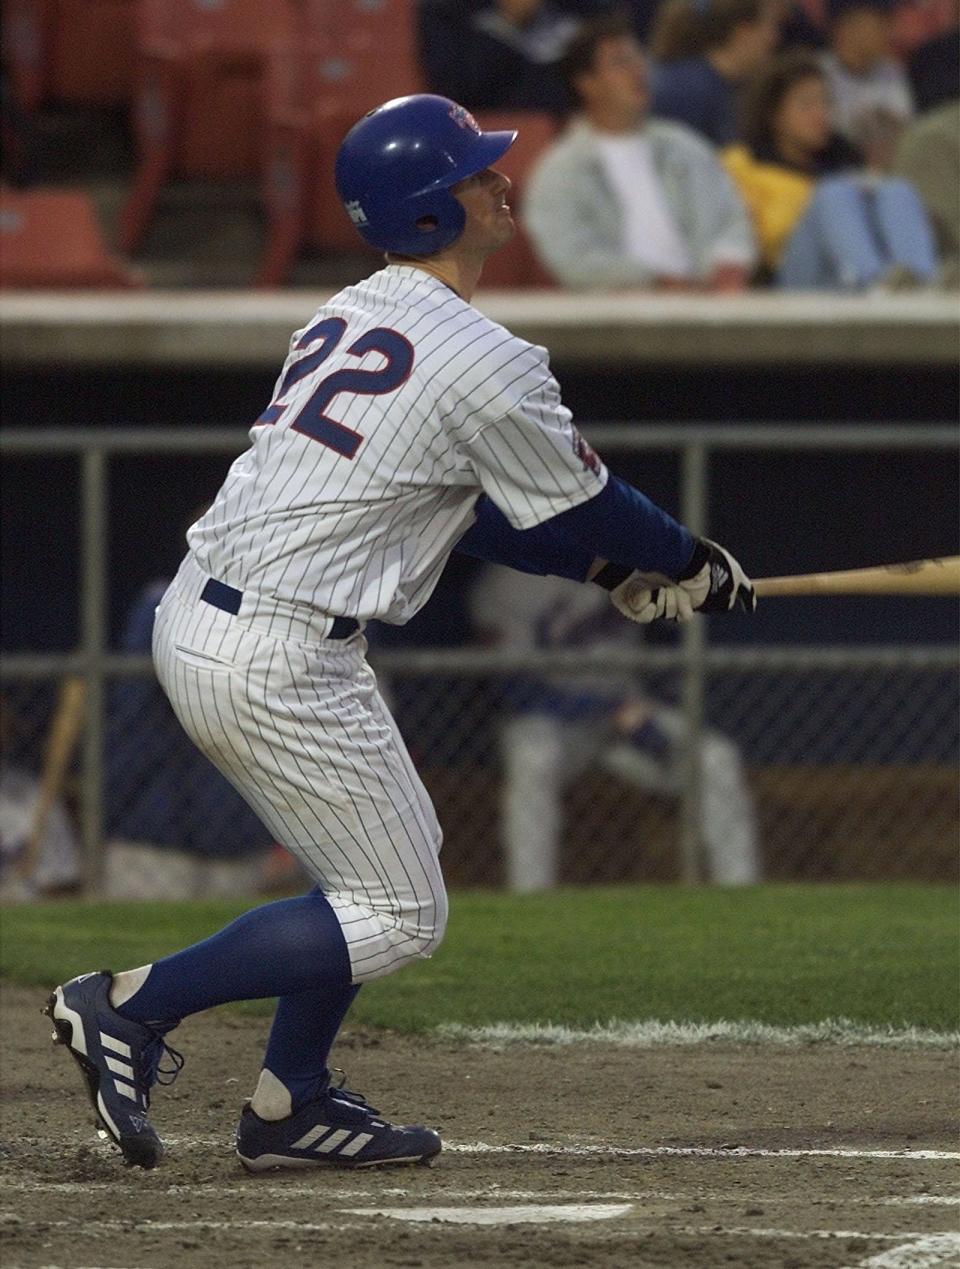 Iowa Cubs pitcher Mark Prior, above, connects on one of his two home runs May 7, 2002, at Sec Taylor Stadium (now called Principal Park). "God opened up a nice wind stream, I guess," Prior said. "I don't know where the home runs came from."